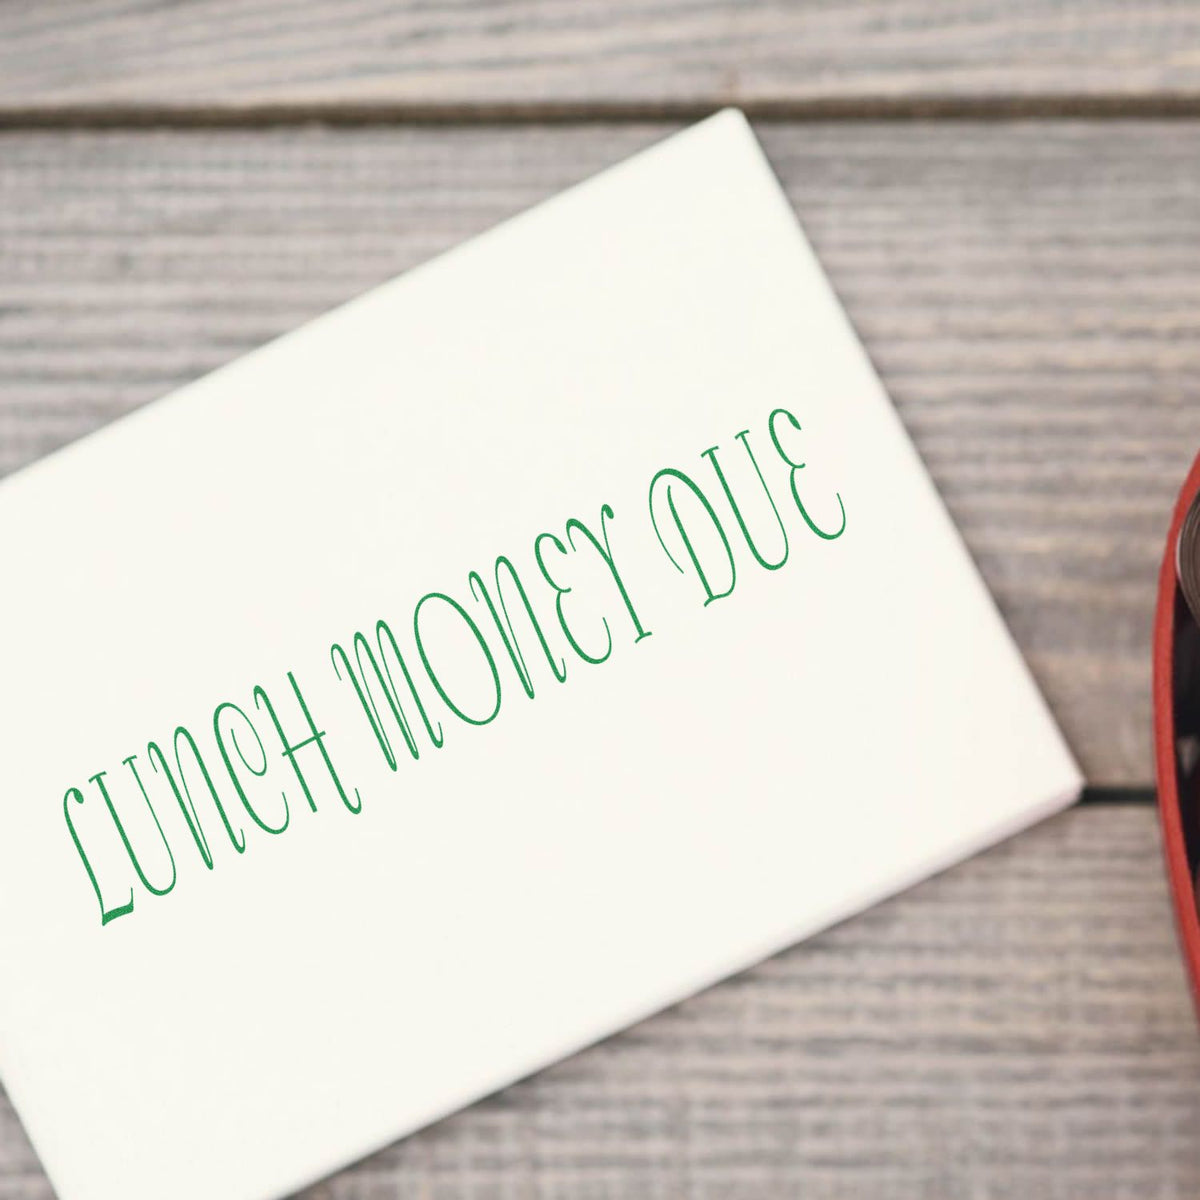 Lunch Money Due Rubber Stamp In Use